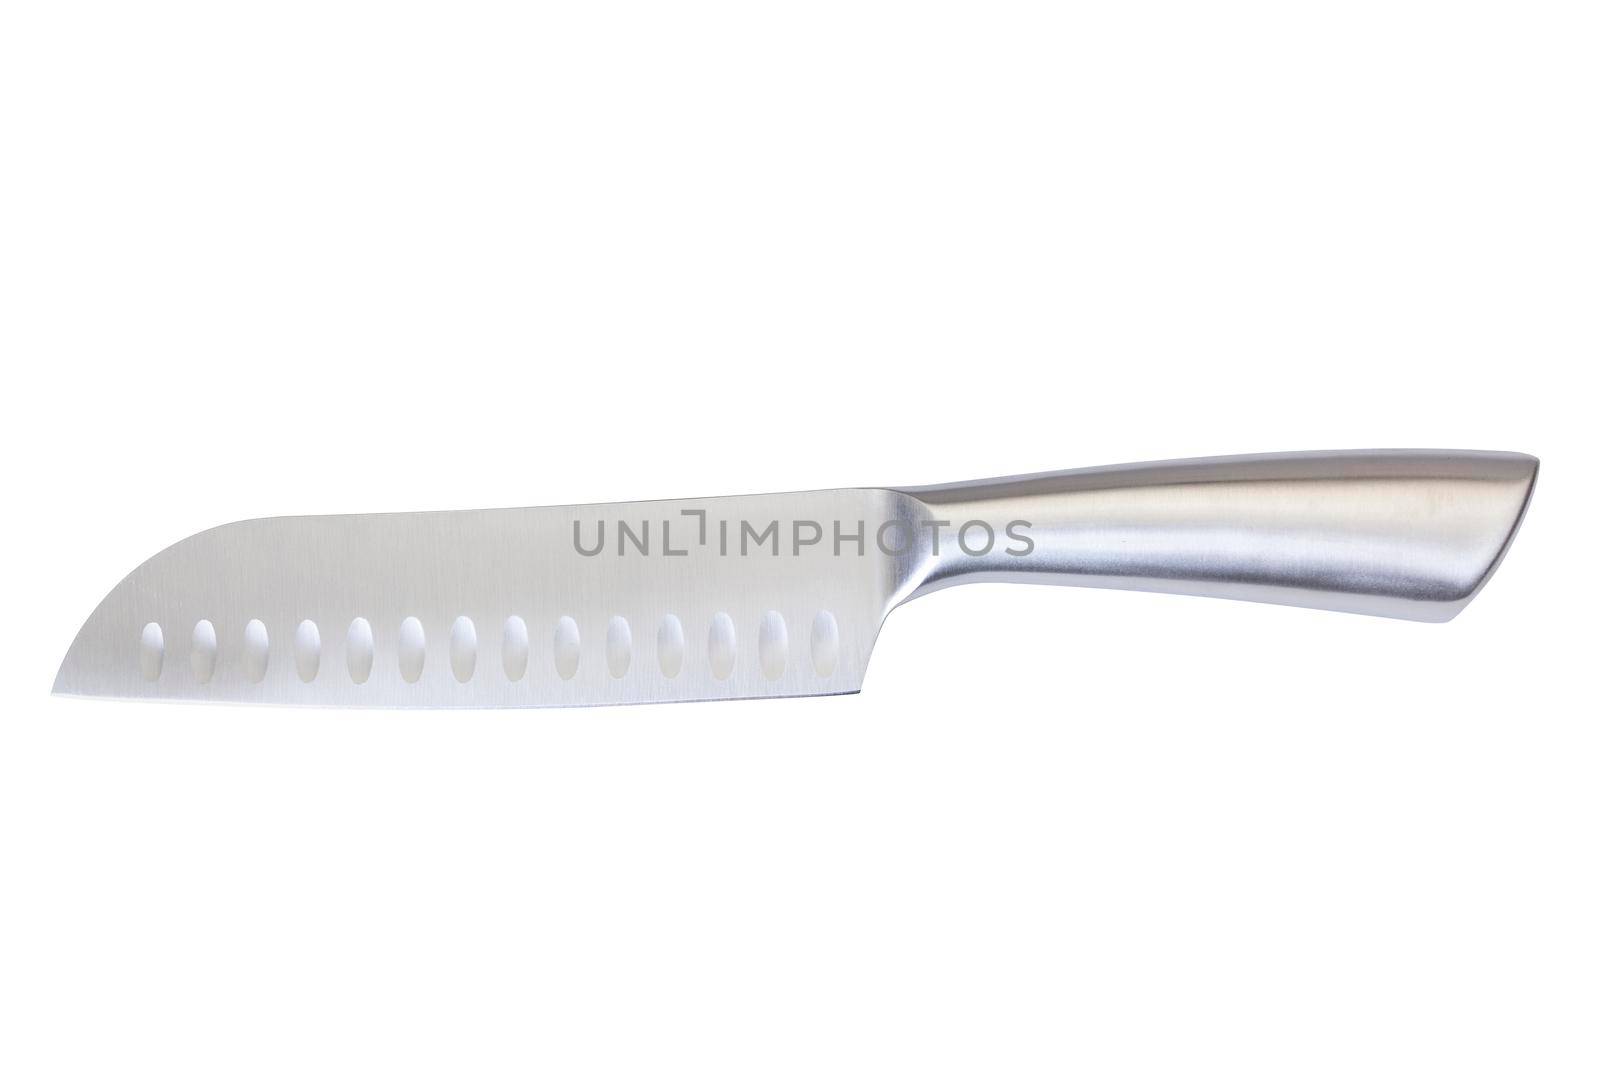 High-quality, high-durable stainless steel Santoku chef's knife, isolated on white with clipping path.